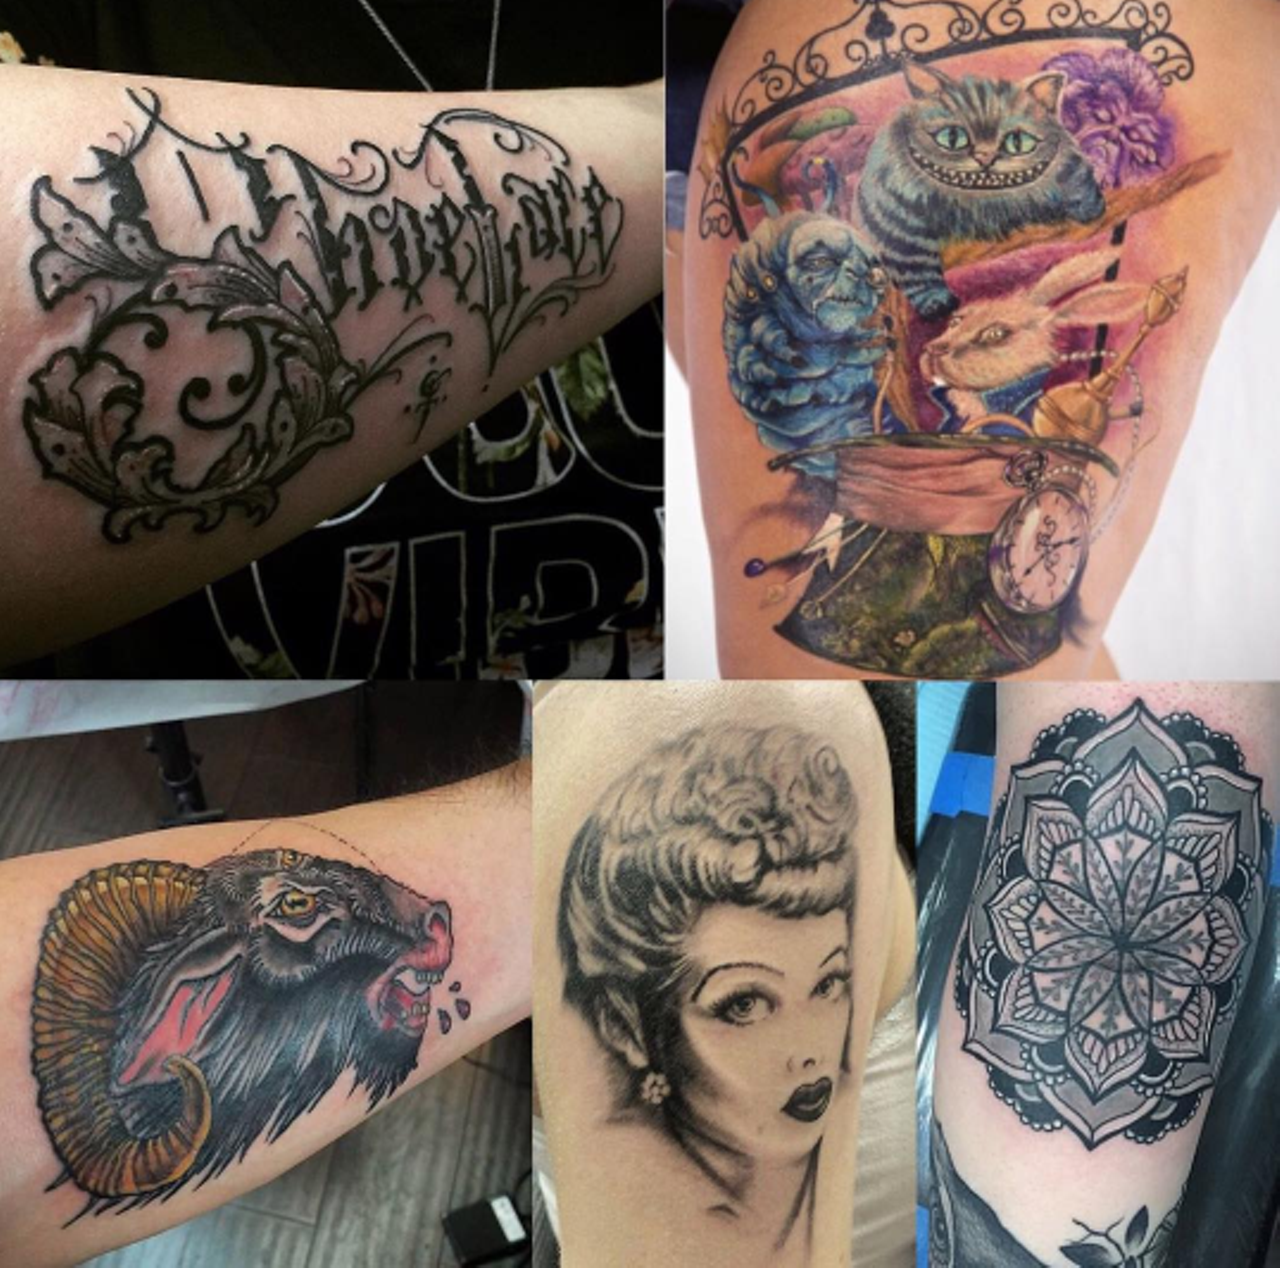 Dermastain Tattoo
Address 502 Embassy Oaks
Call (210) 545-3541for hours and more information. 
Photo via Facebook/dermastaintattoo